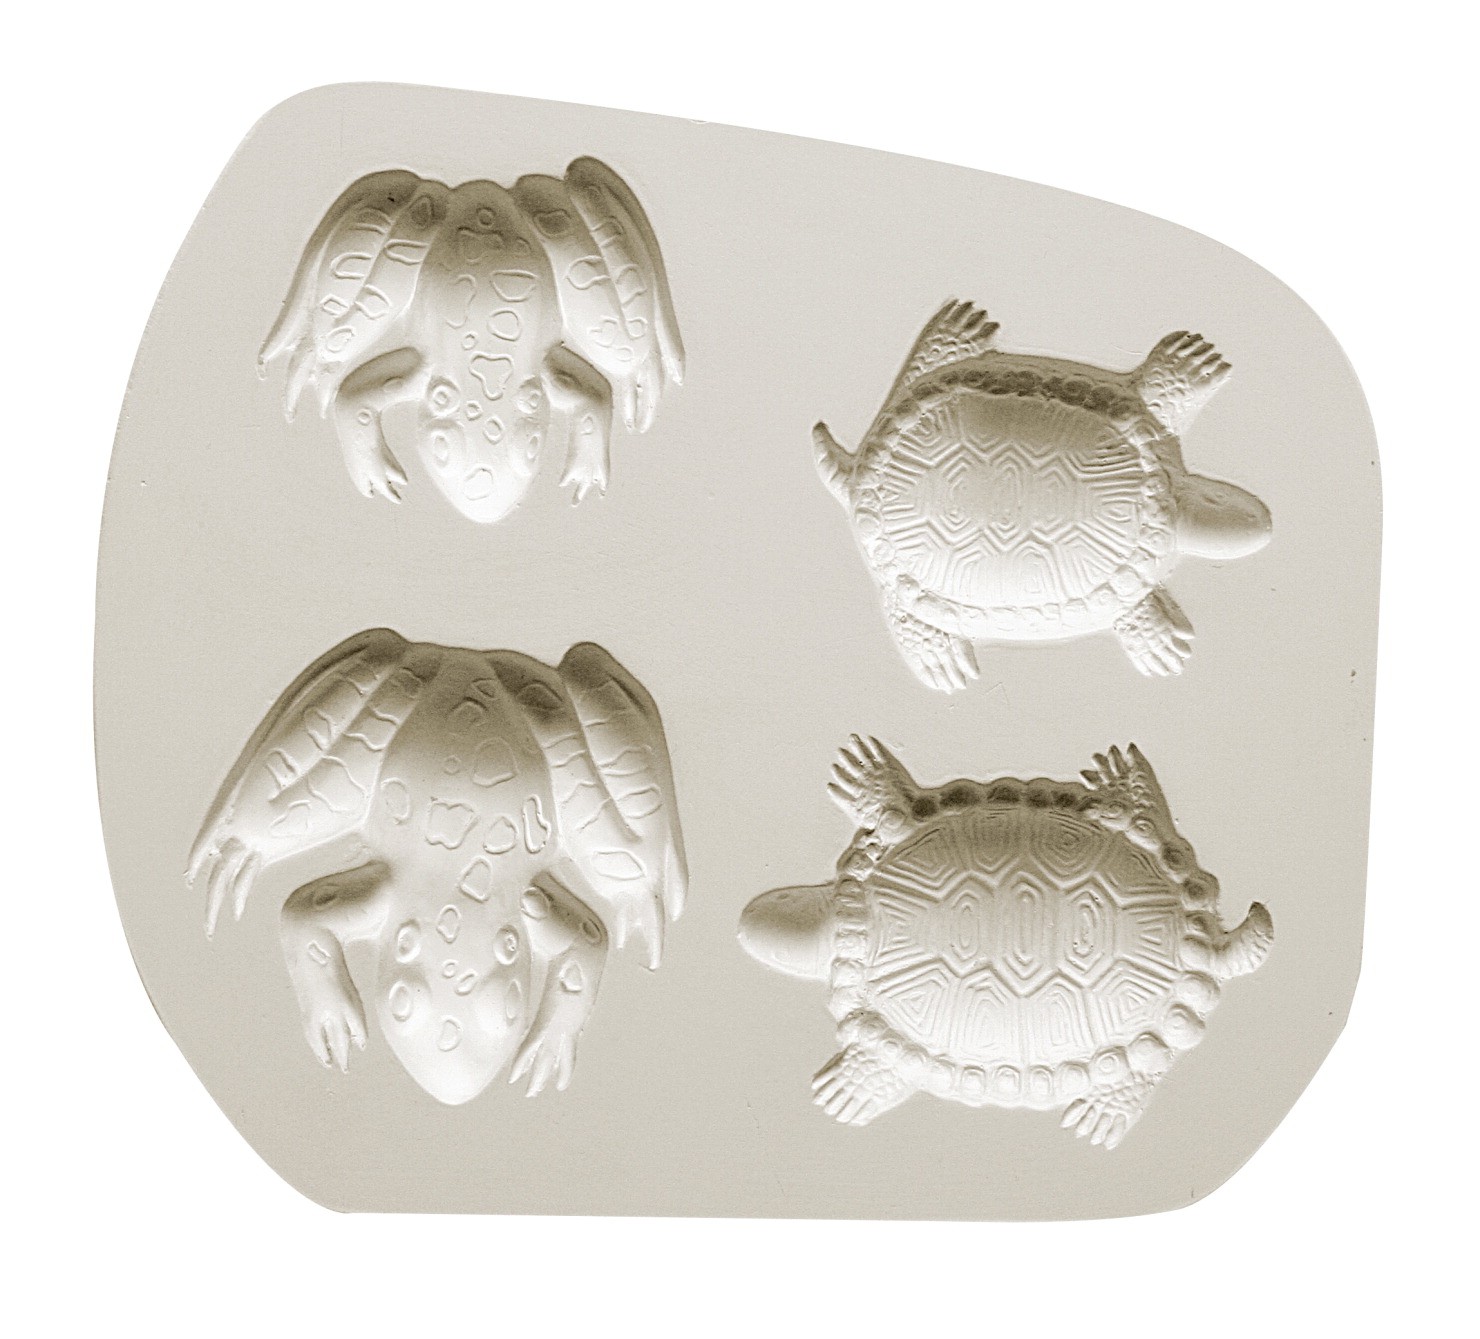 Amaco Turtle and Frog Plaster Sprig Mold, 7 X 6-1/4"